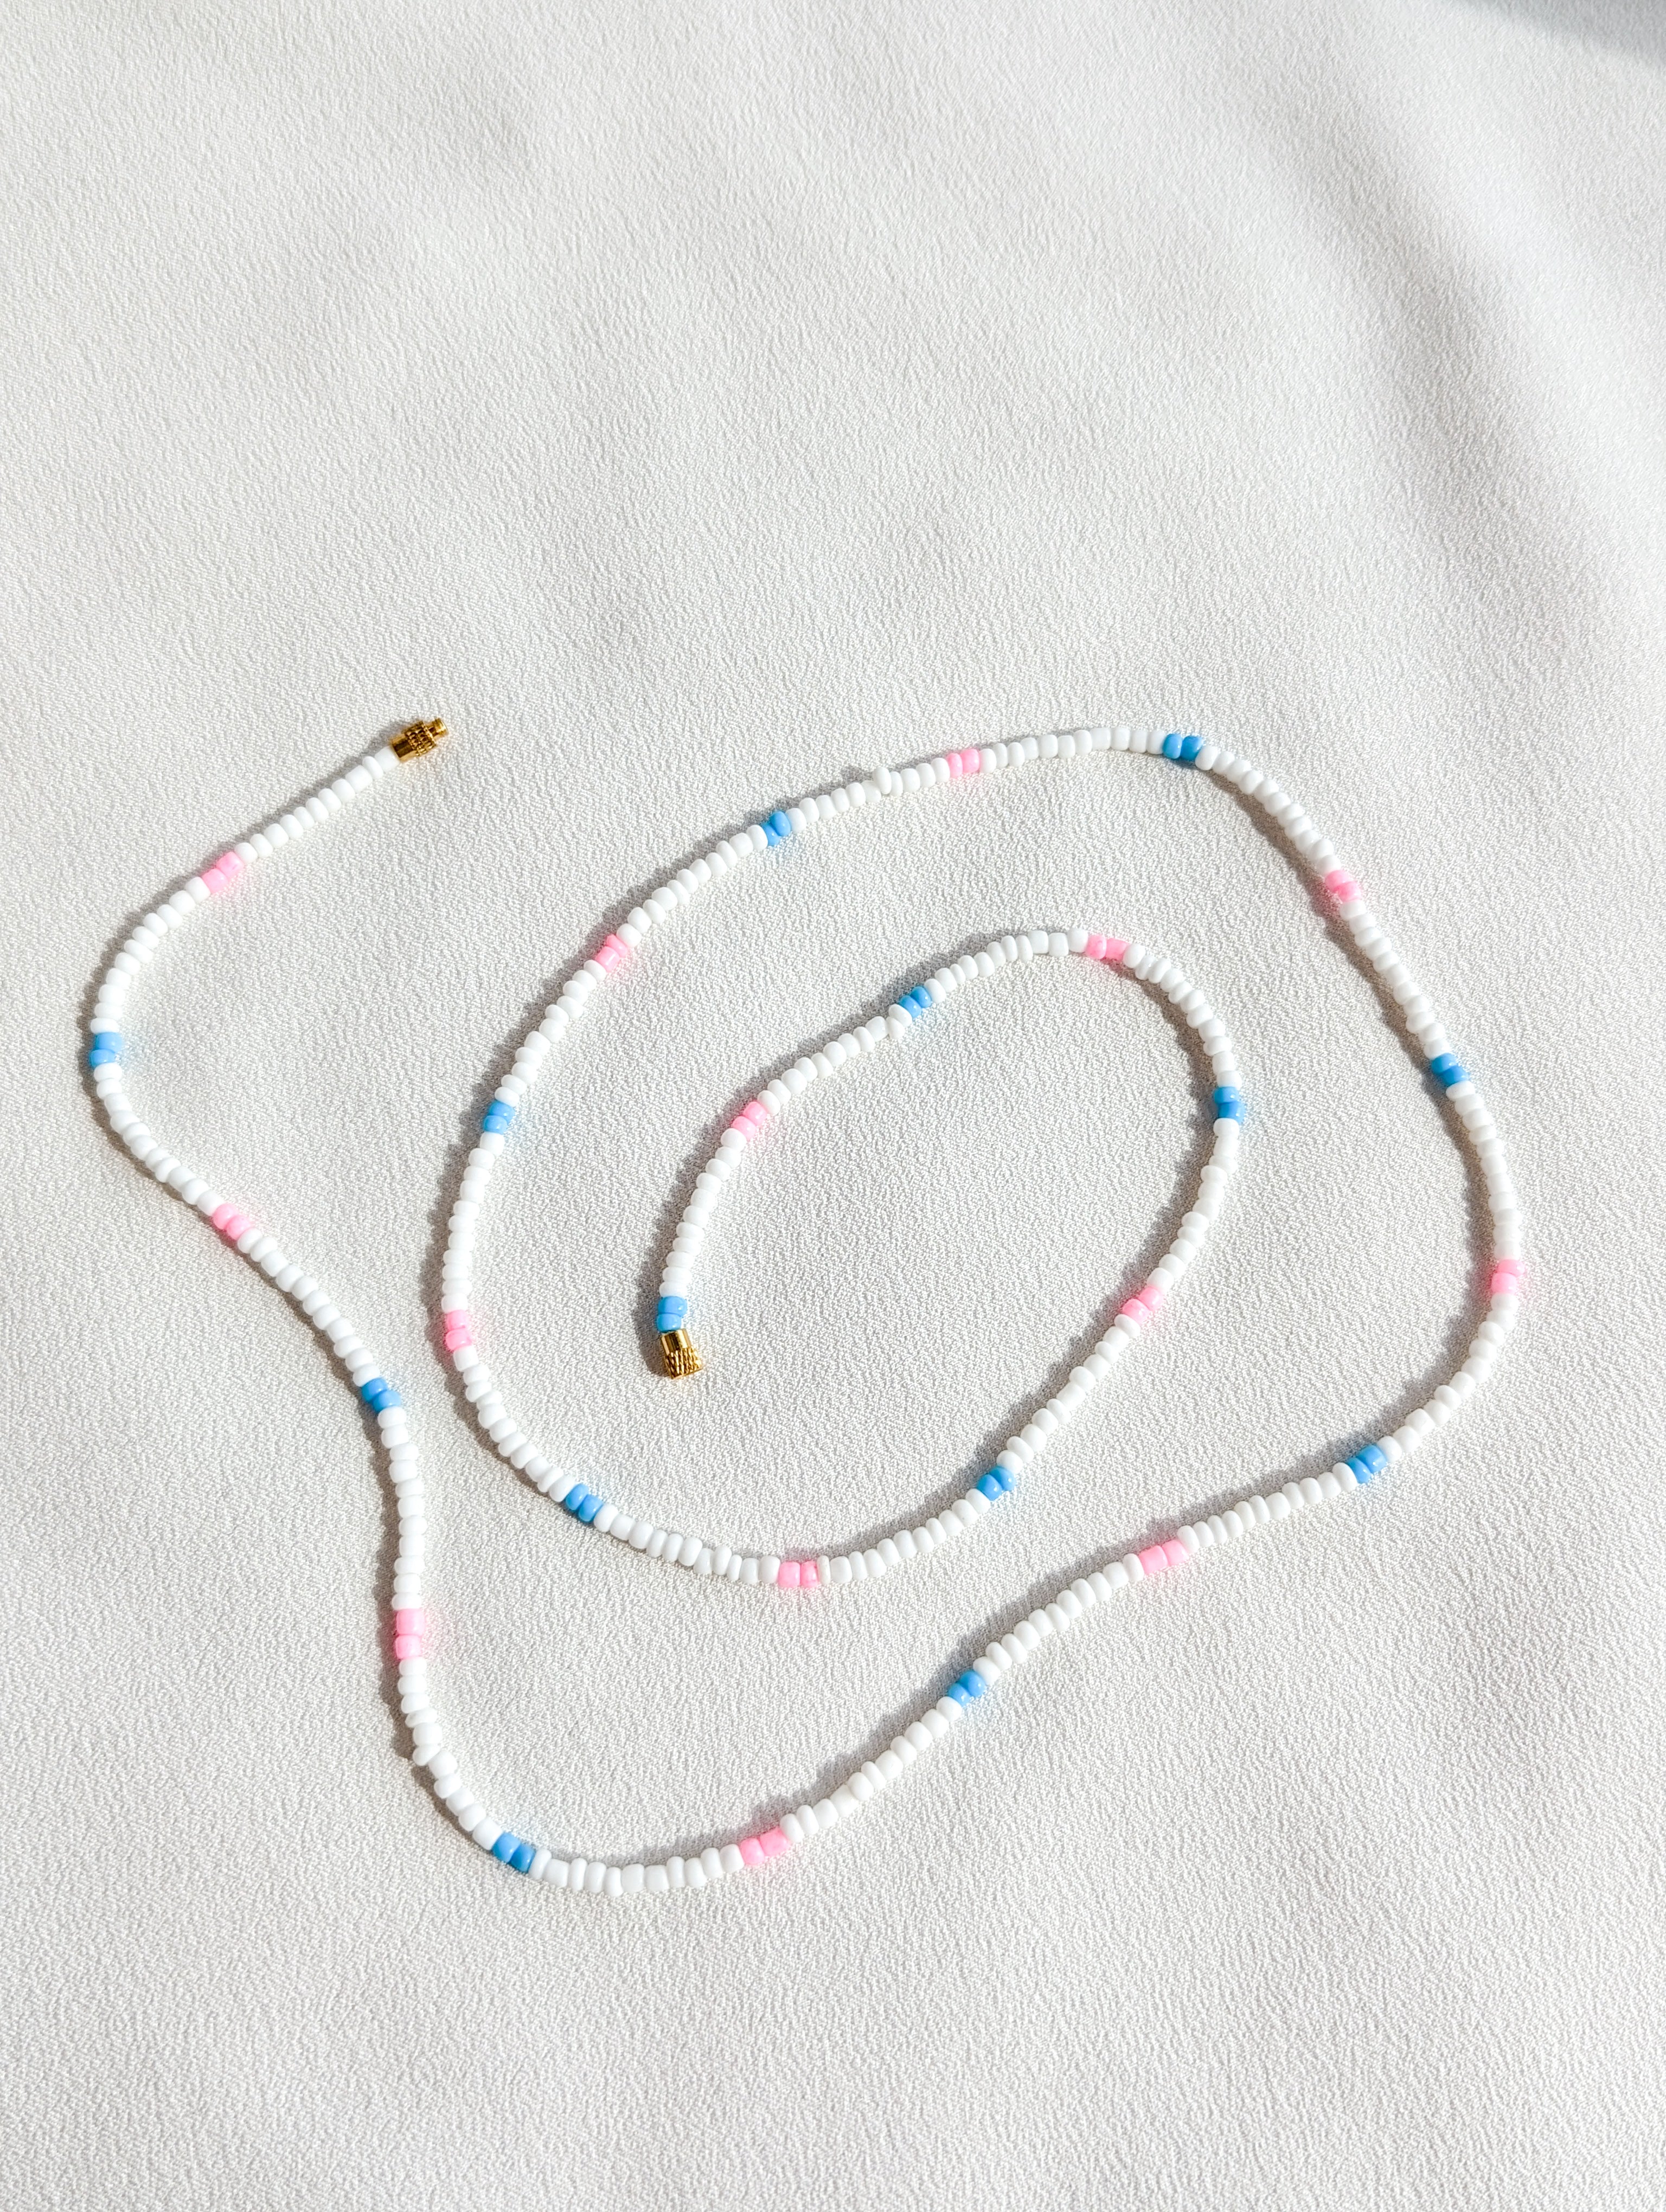 [THE ELEVEN] Belly Chain: White/Pink + Blue [Small Beads]